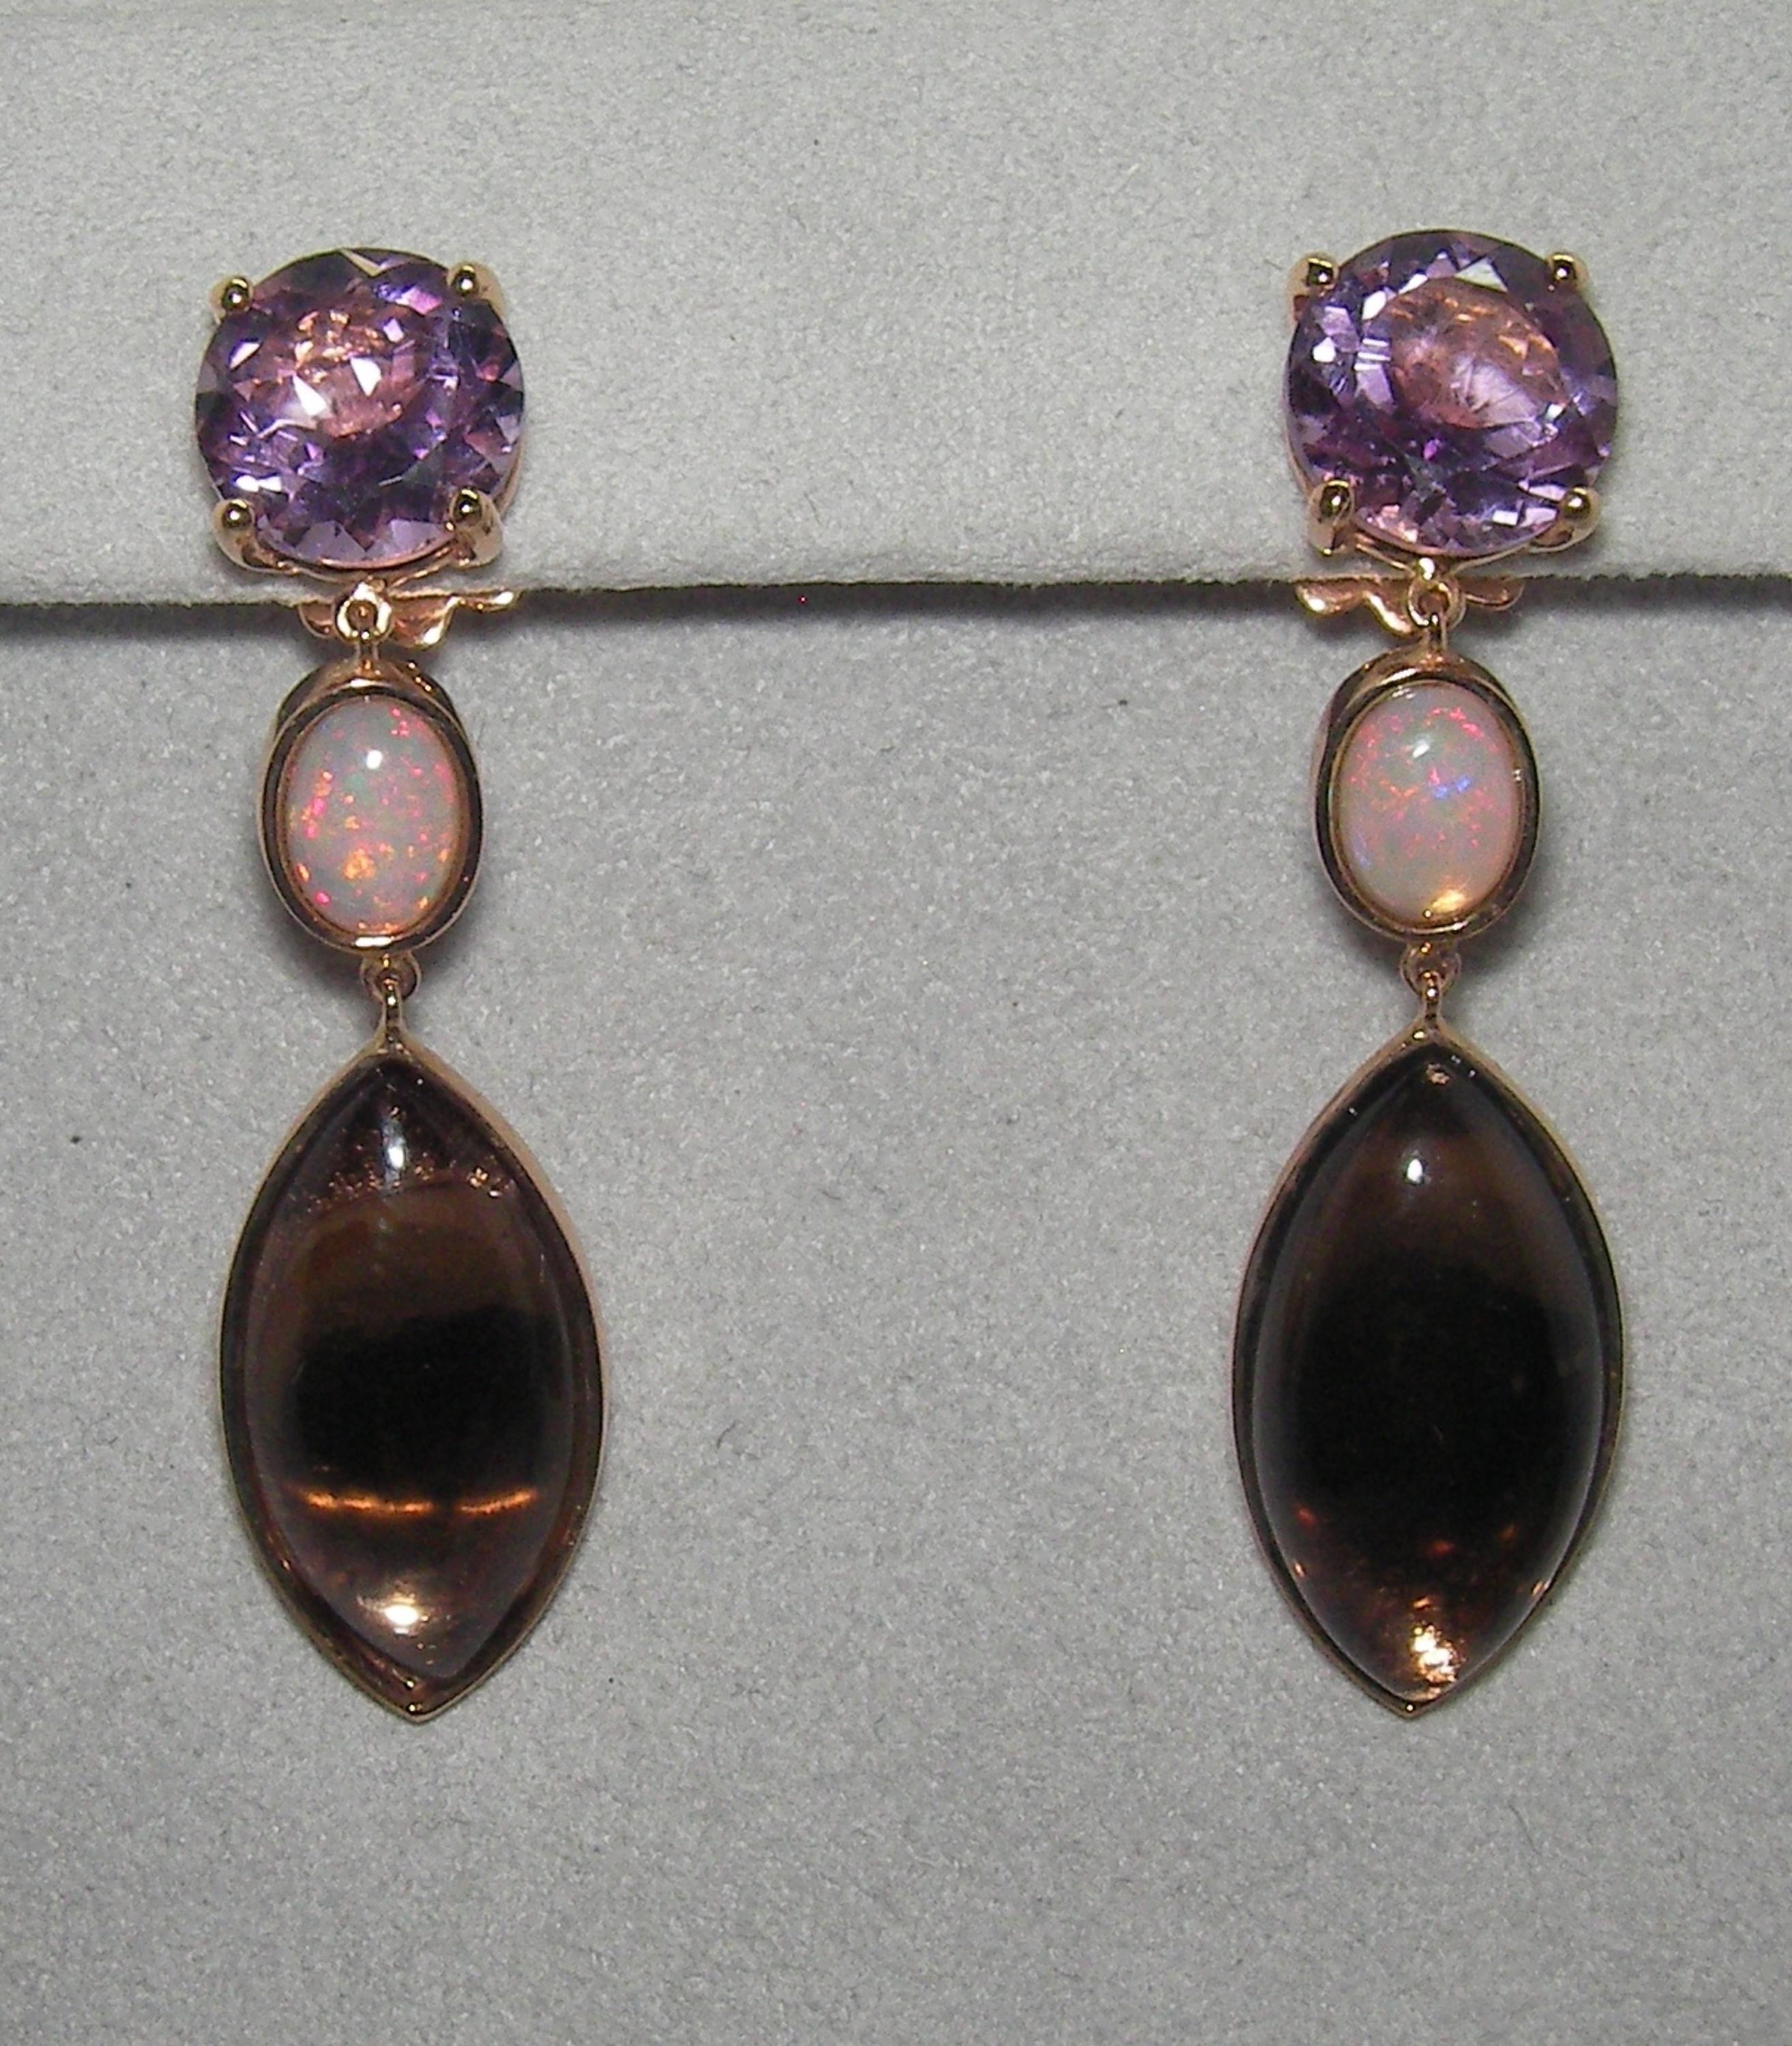 These elegant 18 Karat Rose Gold Dangle Earrings exude elegance and sophistication. The base of each earring consists of a vivid round briolette cut Amethyst, followed by an oval cabochon cut Opal and finished with a beautiful marquise cabochon cut